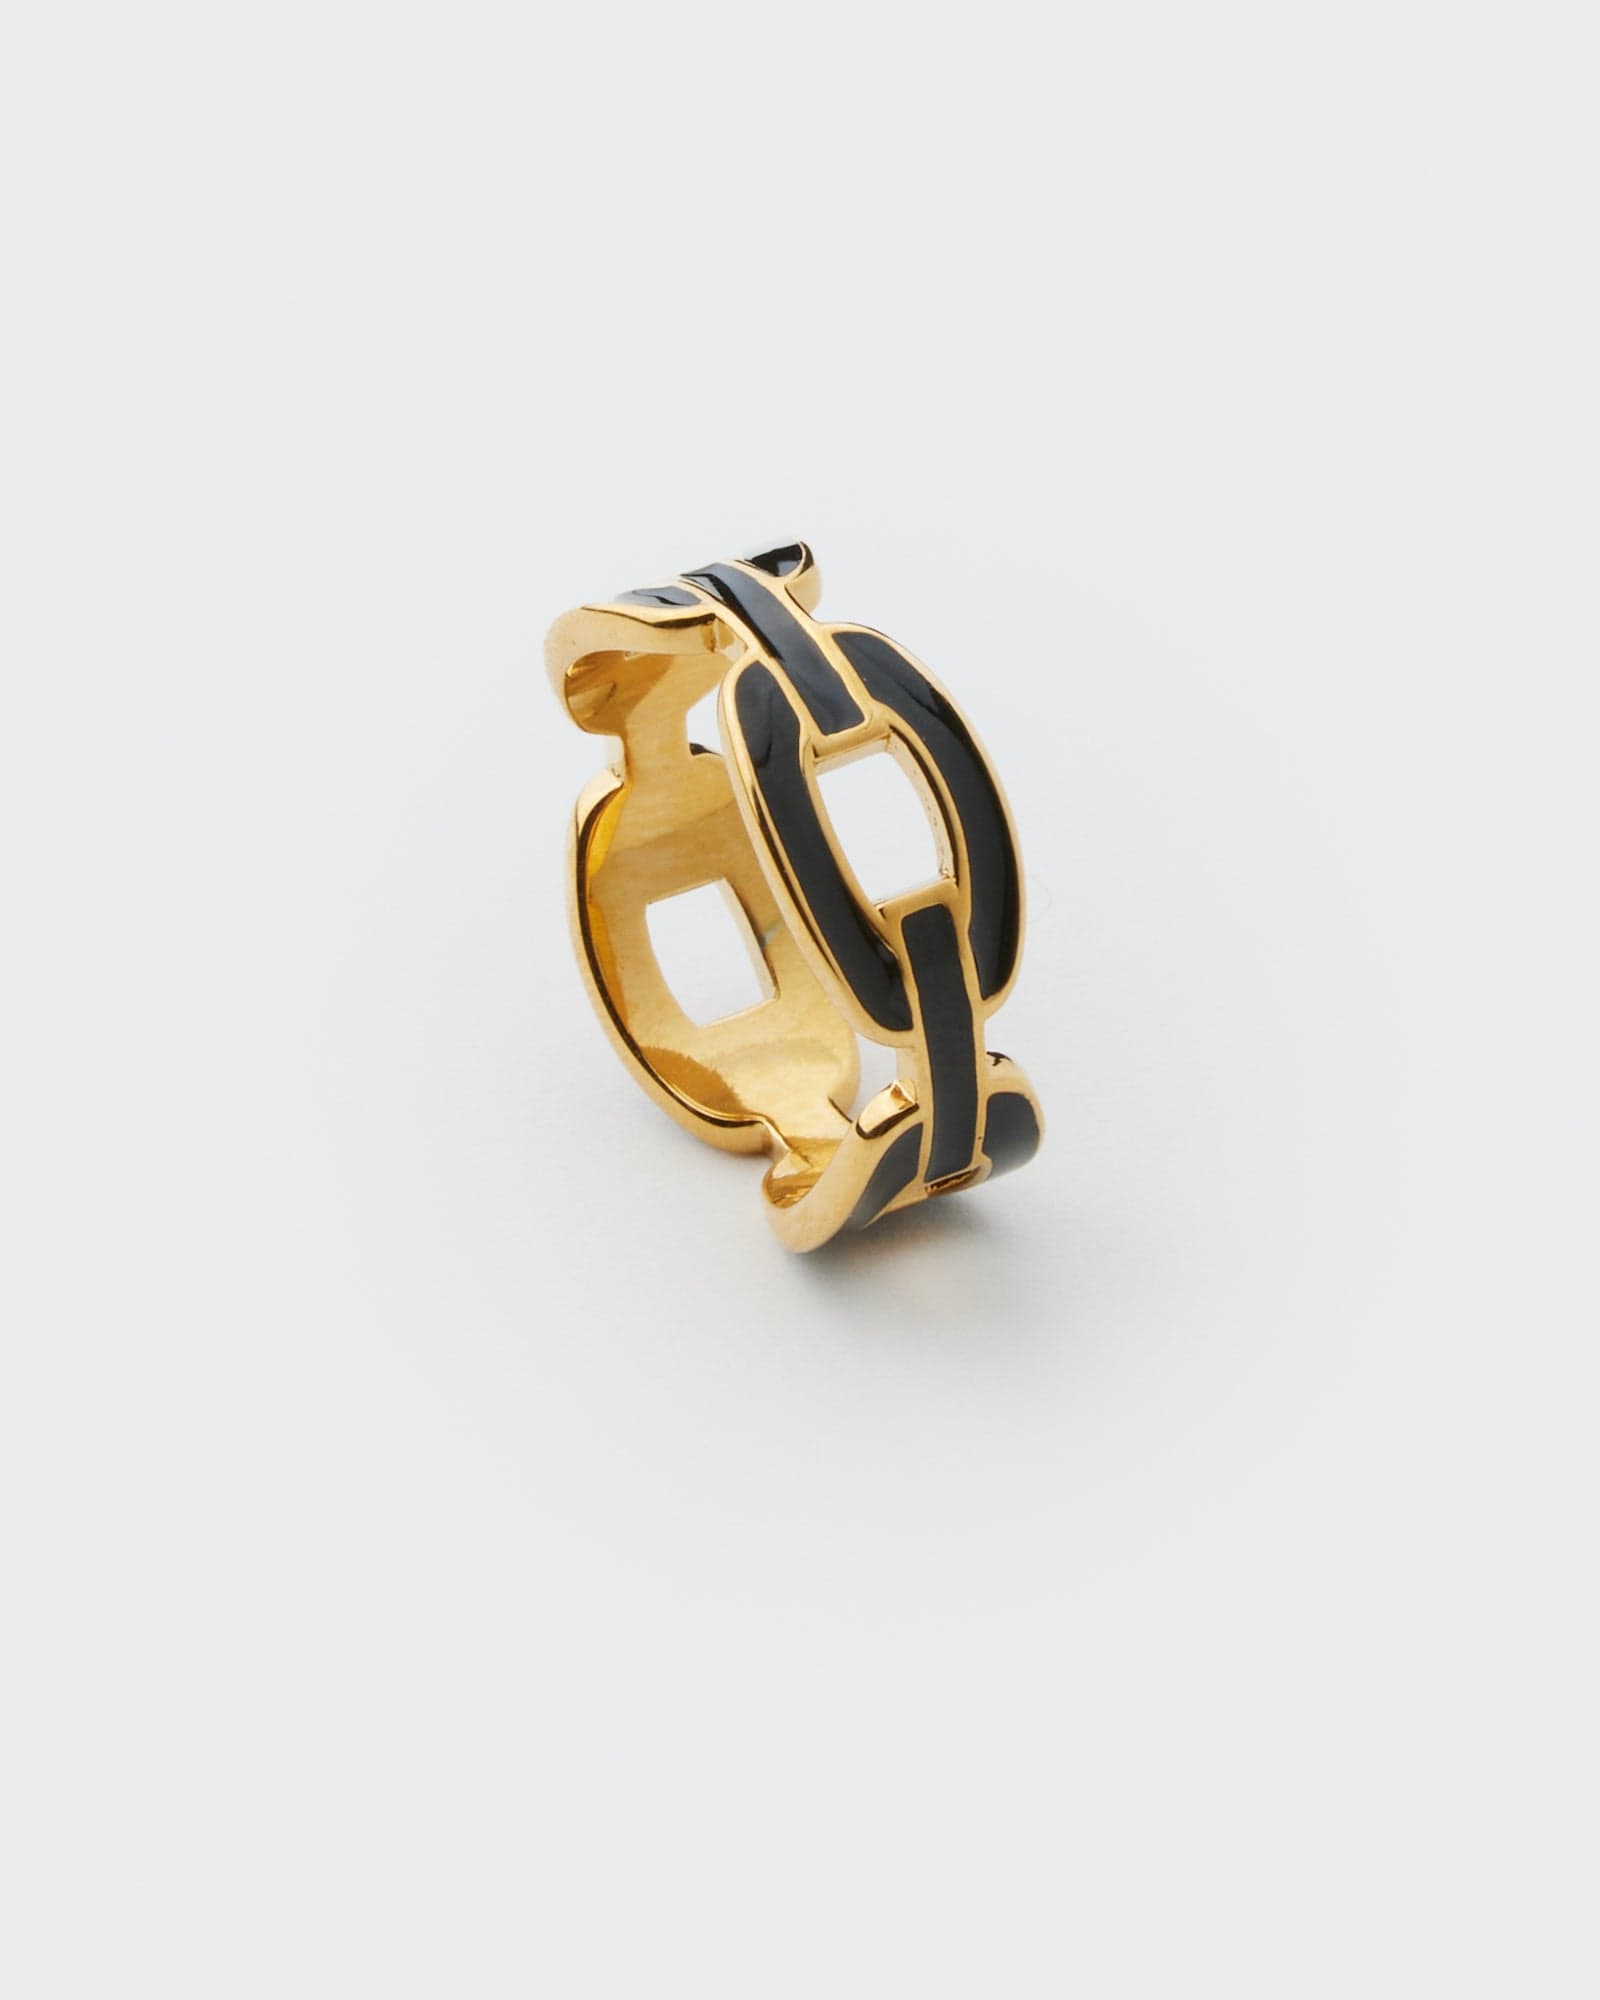 Gold and black ring resembling chain links